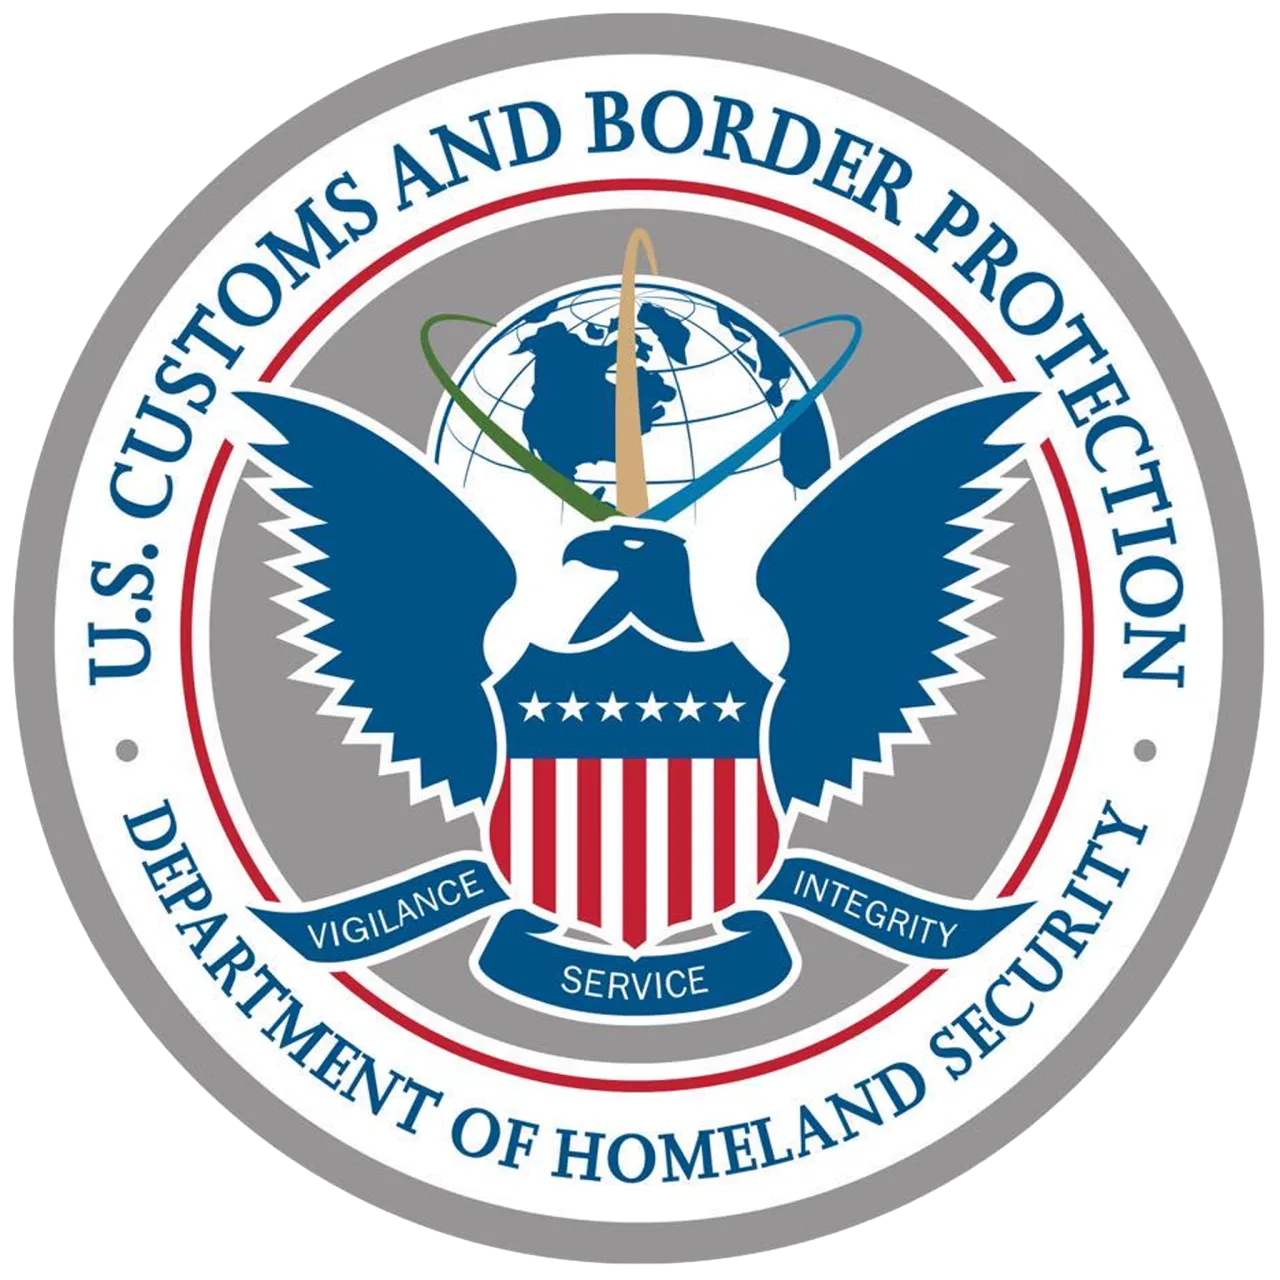 The US Border Patrol uses USFleetTracking products and services to keep our borders secure and our country safe.